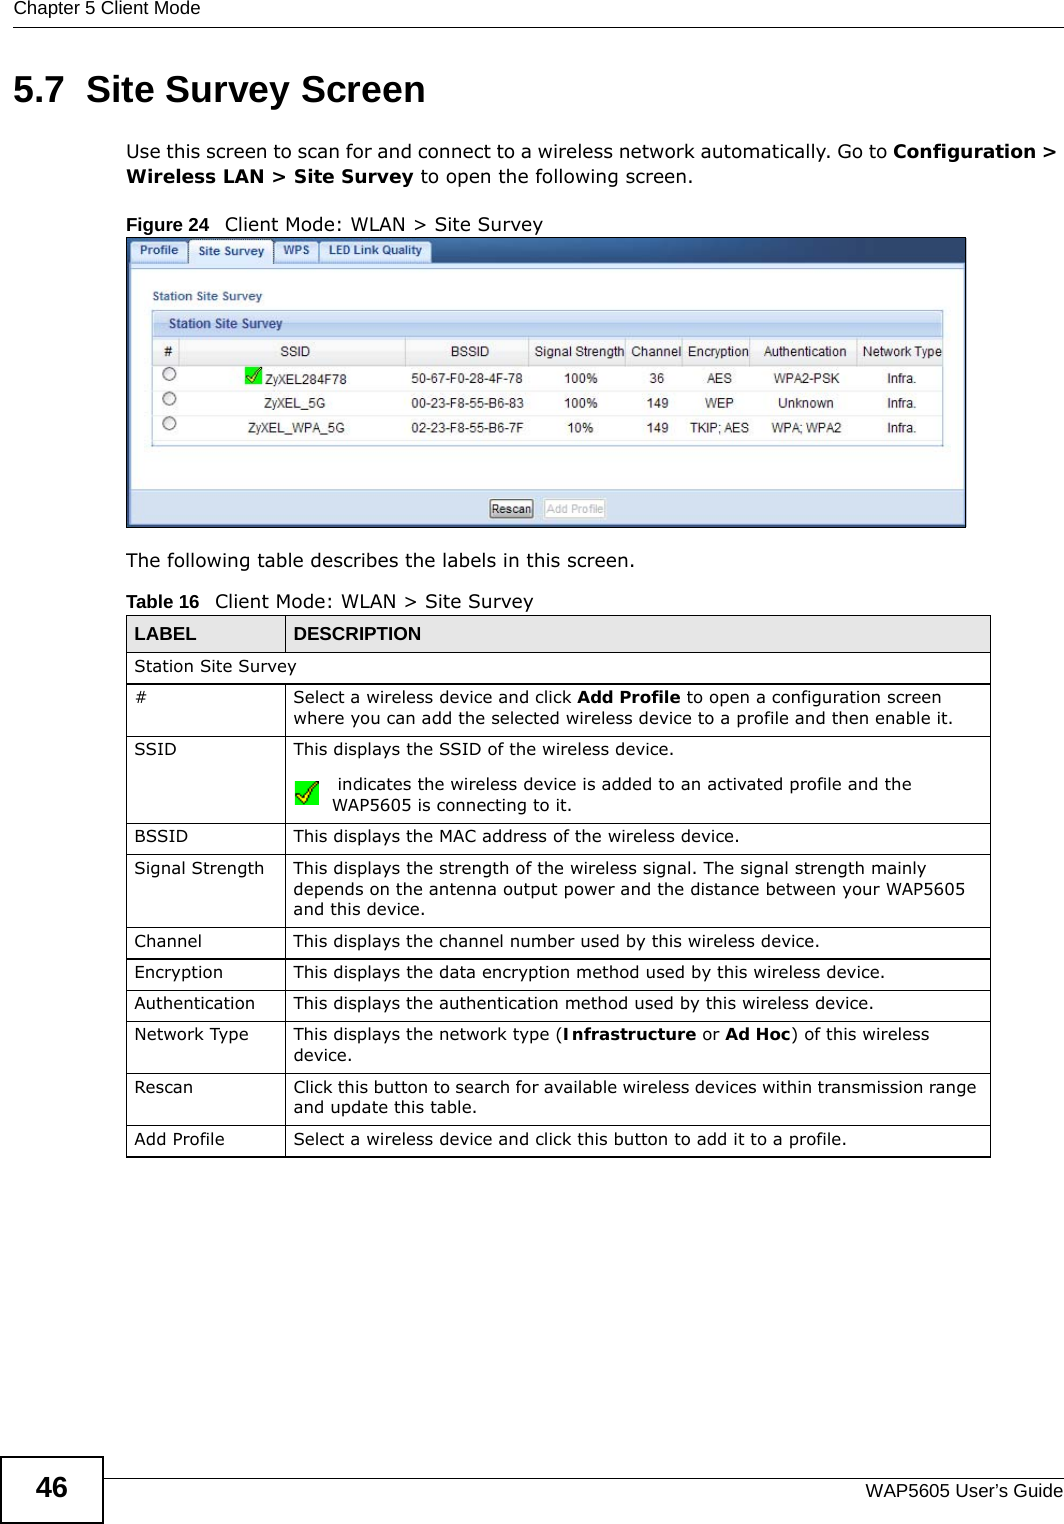 Chapter 5 Client ModeWAP5605 User’s Guide465.7  Site Survey ScreenUse this screen to scan for and connect to a wireless network automatically. Go to Configuration &gt; Wireless LAN &gt; Site Survey to open the following screen.Figure 24   Client Mode: WLAN &gt; Site Survey The following table describes the labels in this screen. Table 16   Client Mode: WLAN &gt; Site SurveyLABEL  DESCRIPTIONStation Site Survey# Select a wireless device and click Add Profile to open a configuration screen where you can add the selected wireless device to a profile and then enable it.SSID This displays the SSID of the wireless device. indicates the wireless device is added to an activated profile and the WAP5605 is connecting to it.BSSID This displays the MAC address of the wireless device.Signal Strength This displays the strength of the wireless signal. The signal strength mainly depends on the antenna output power and the distance between your WAP5605 and this device.Channel This displays the channel number used by this wireless device. Encryption This displays the data encryption method used by this wireless device.Authentication This displays the authentication method used by this wireless device.Network Type This displays the network type (Infrastructure or Ad Hoc) of this wireless device.Rescan Click this button to search for available wireless devices within transmission range and update this table.Add Profile Select a wireless device and click this button to add it to a profile.